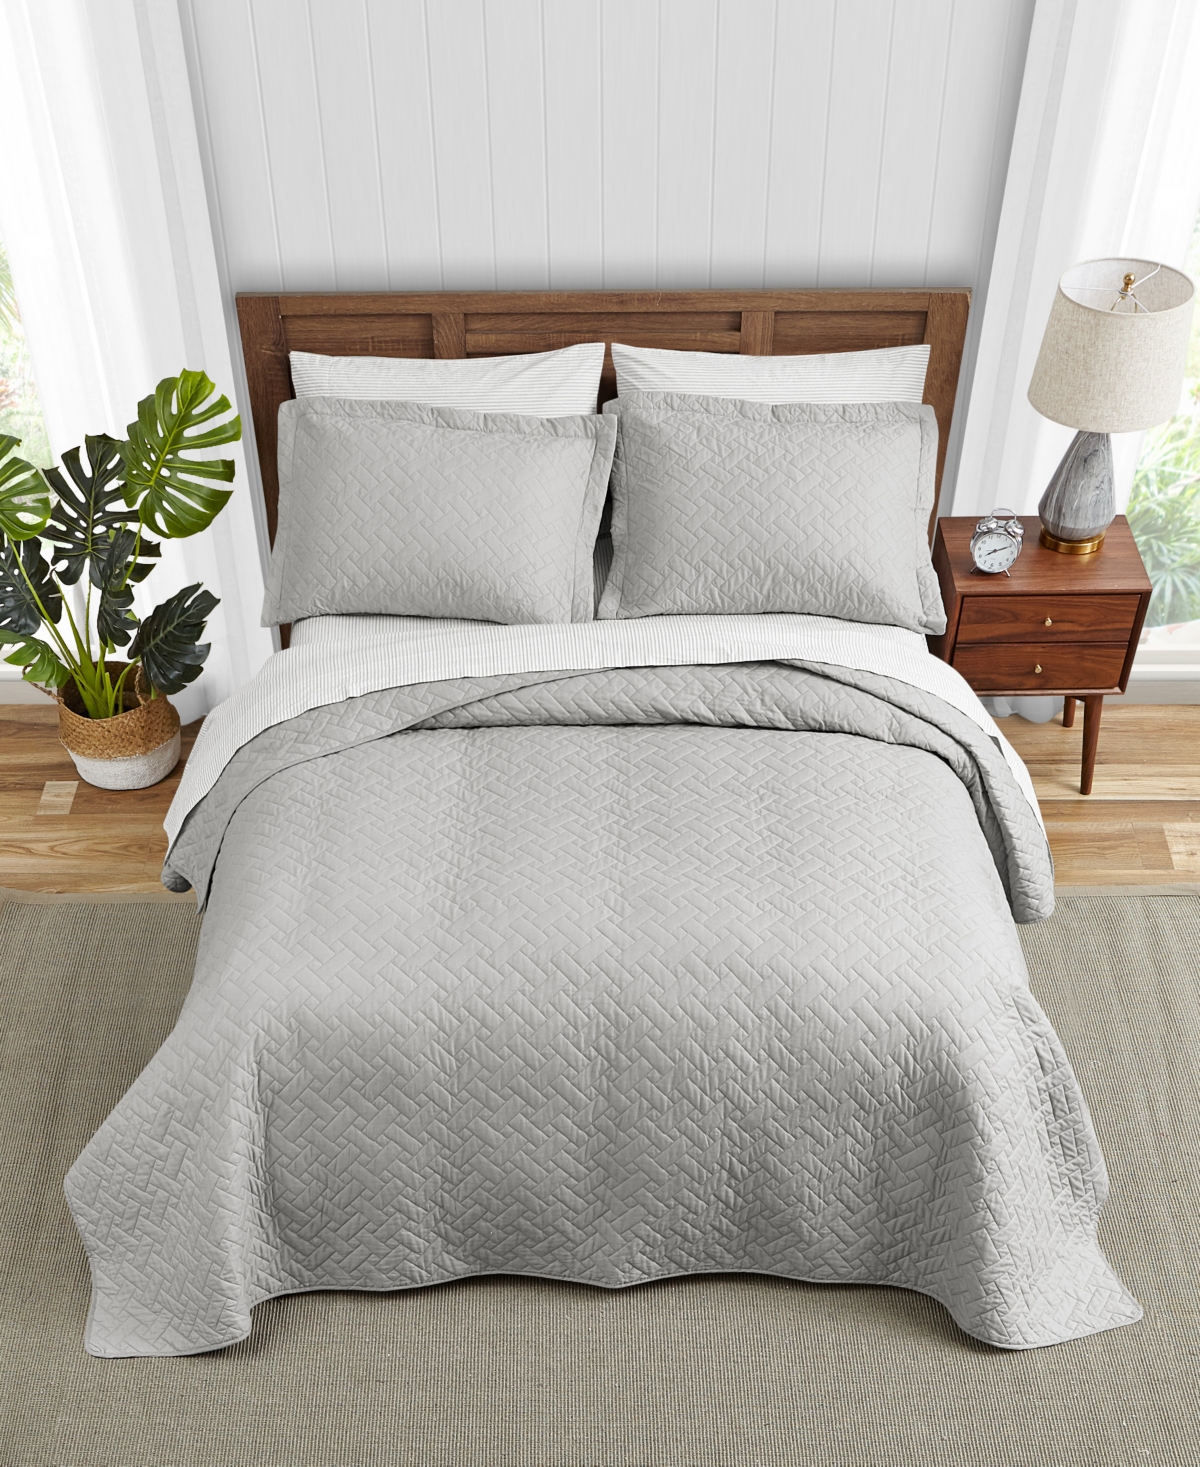 Tommy Bahama Home Tommy Bahama Raffia Solid Cotton Reversible 3 Piece Quilt Set, Full/queen Bedding In Grey